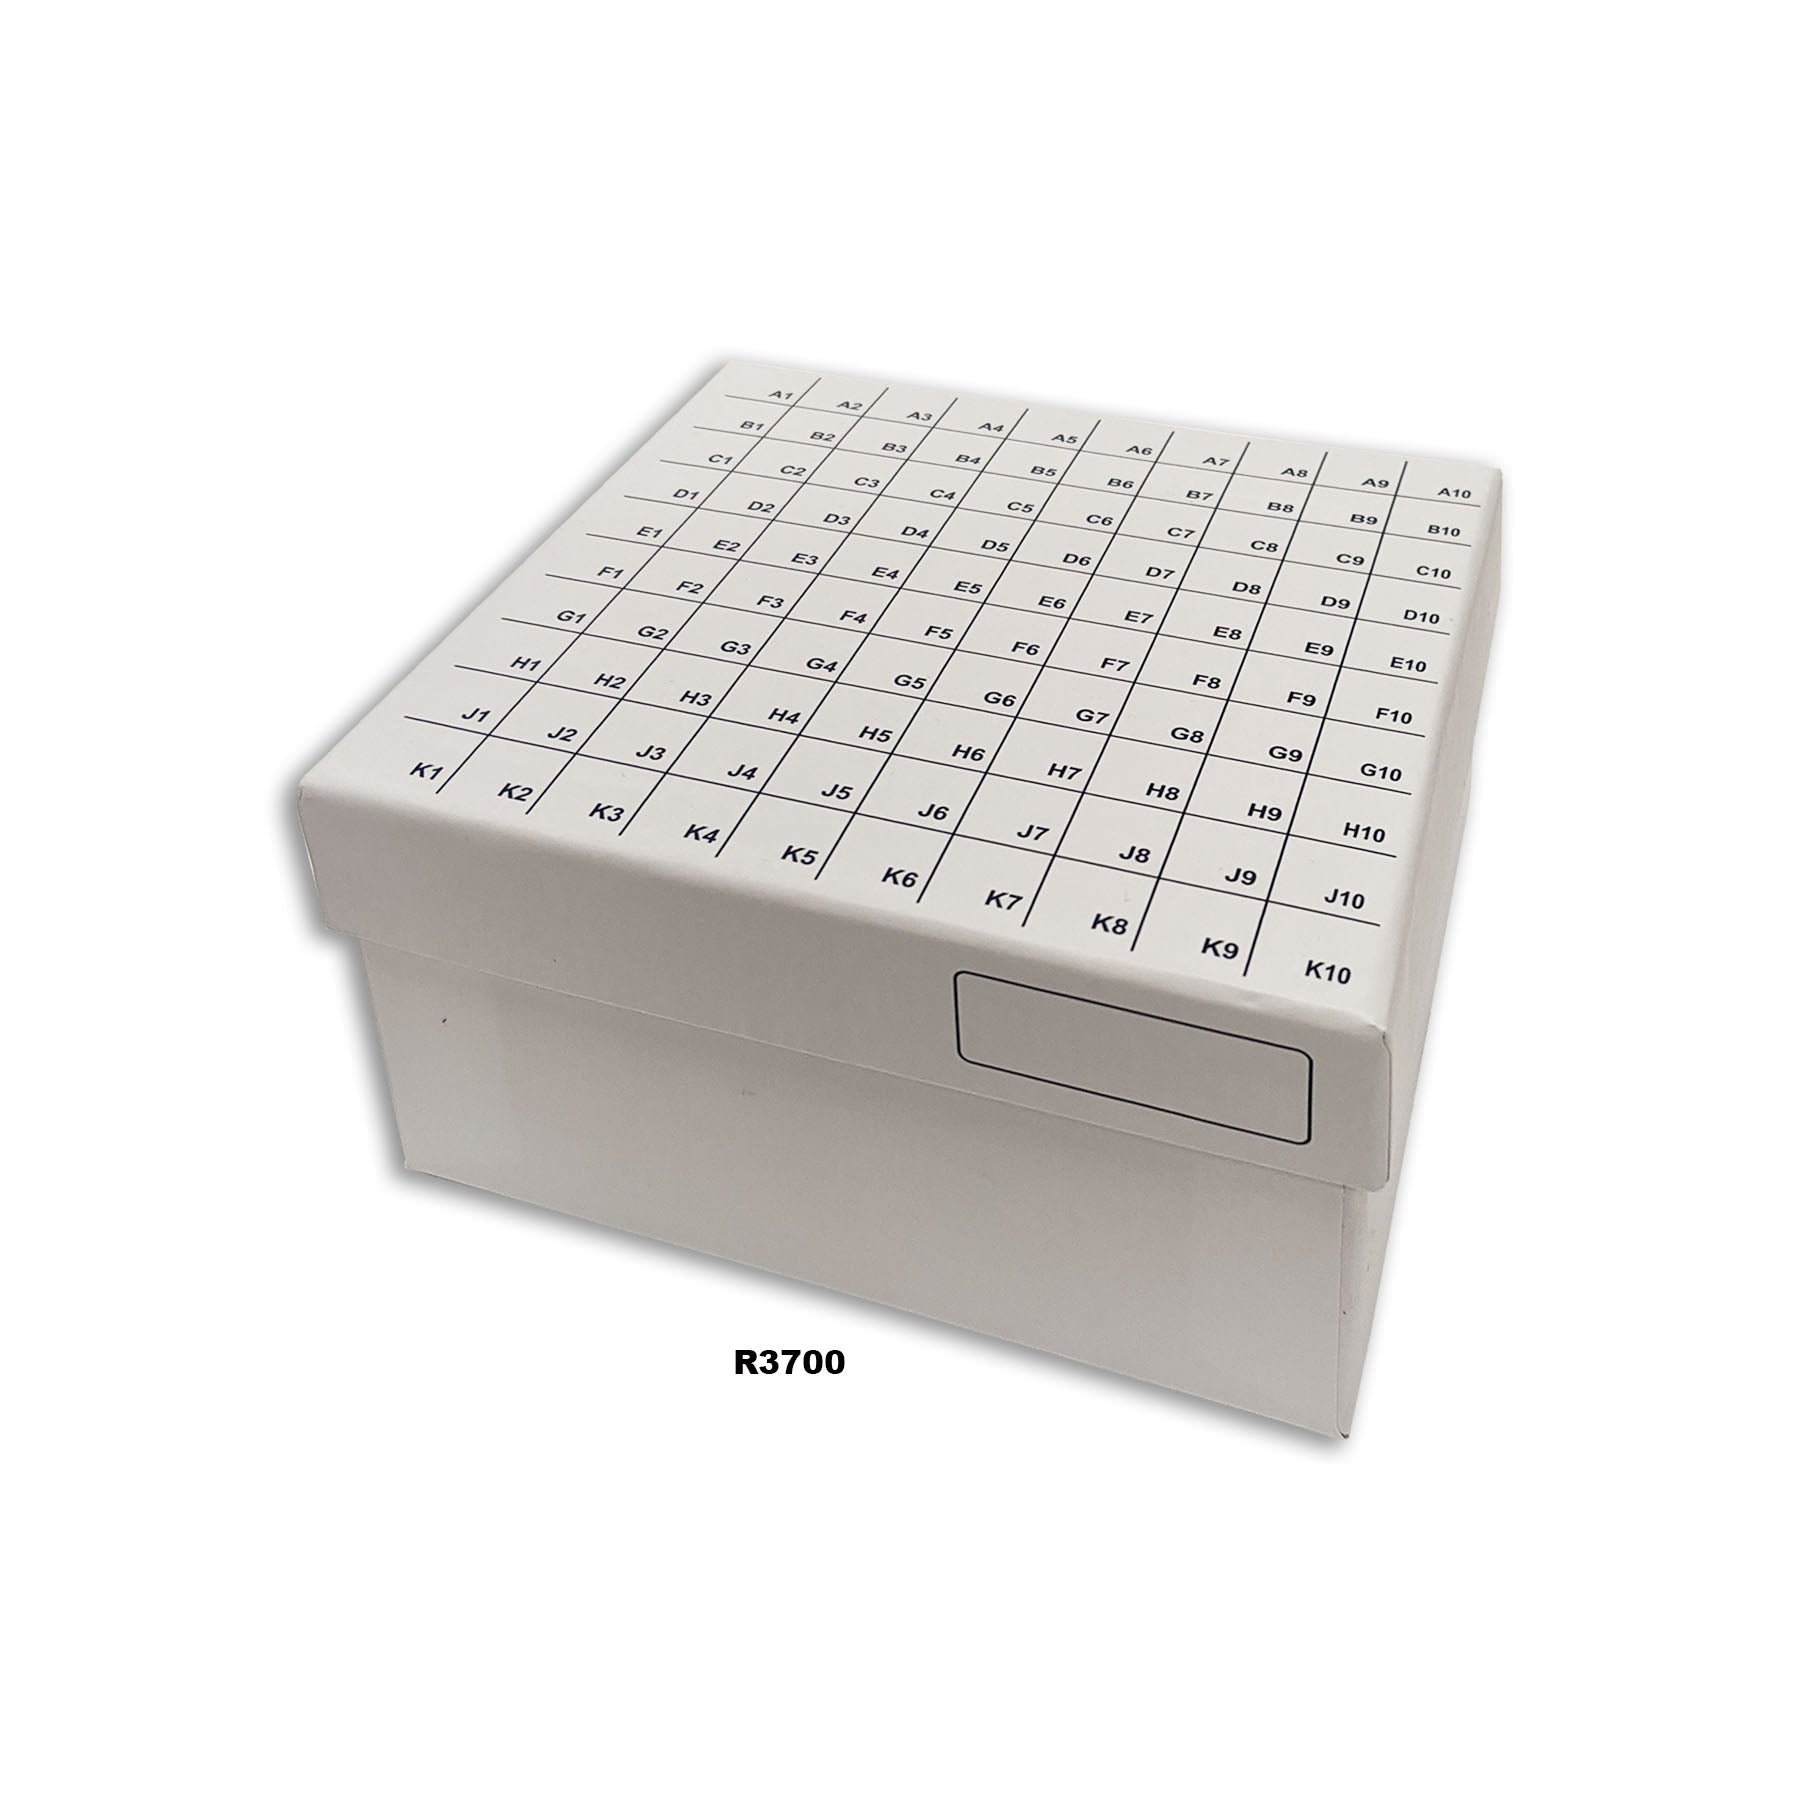 MTC Bio R3700, Fliptop Carboard Freezer Box with Attached Hinged Lid, 100-Place, White, 50/Cs